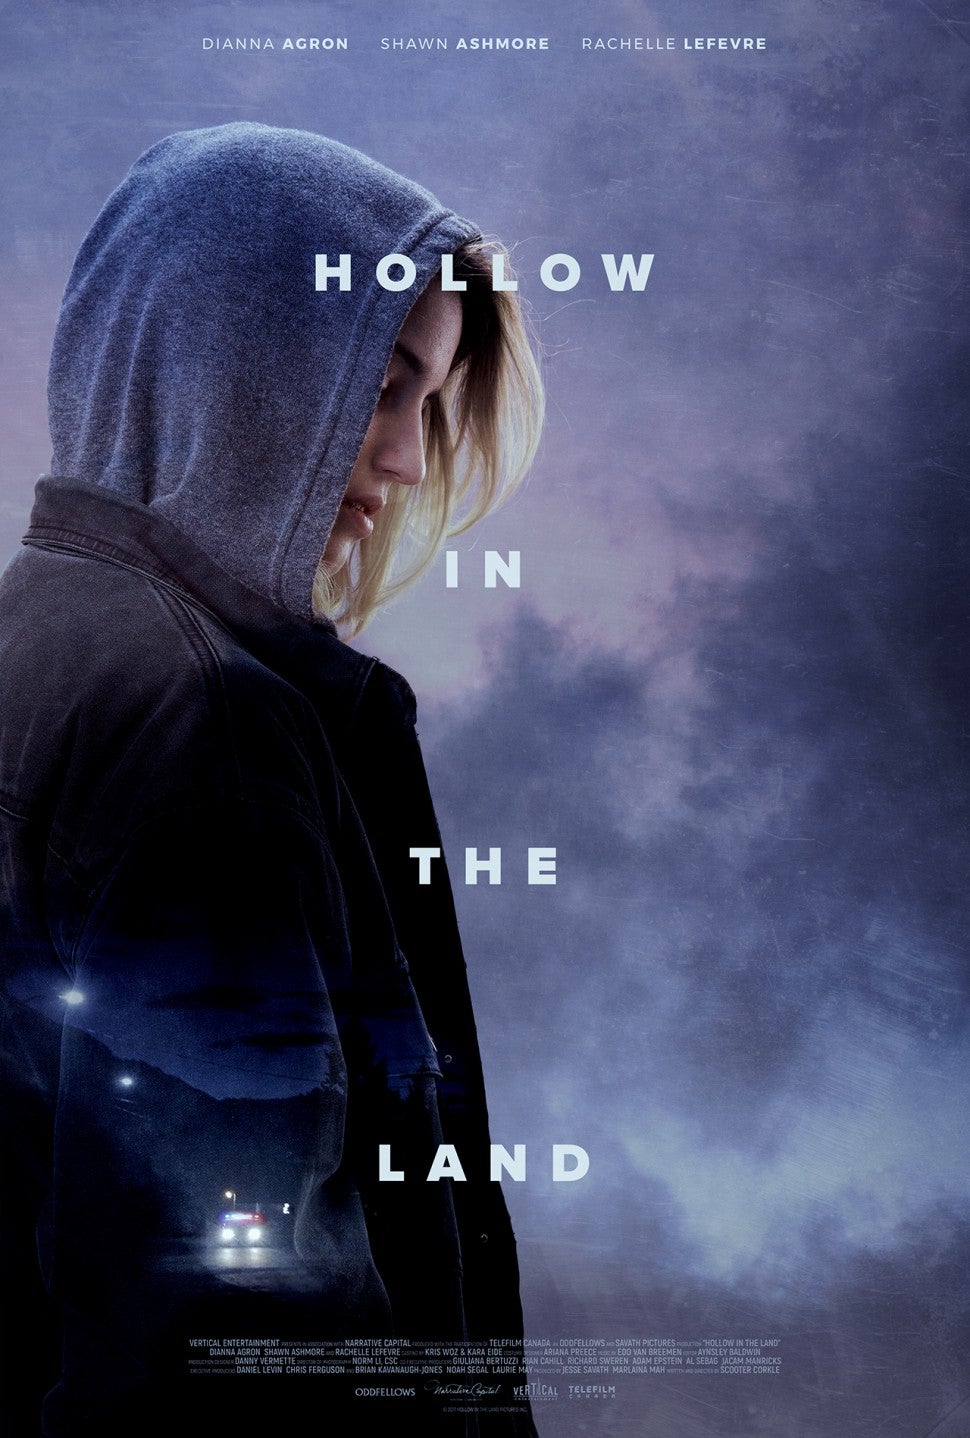 Dianna Agron, Hallow in the Land Poster